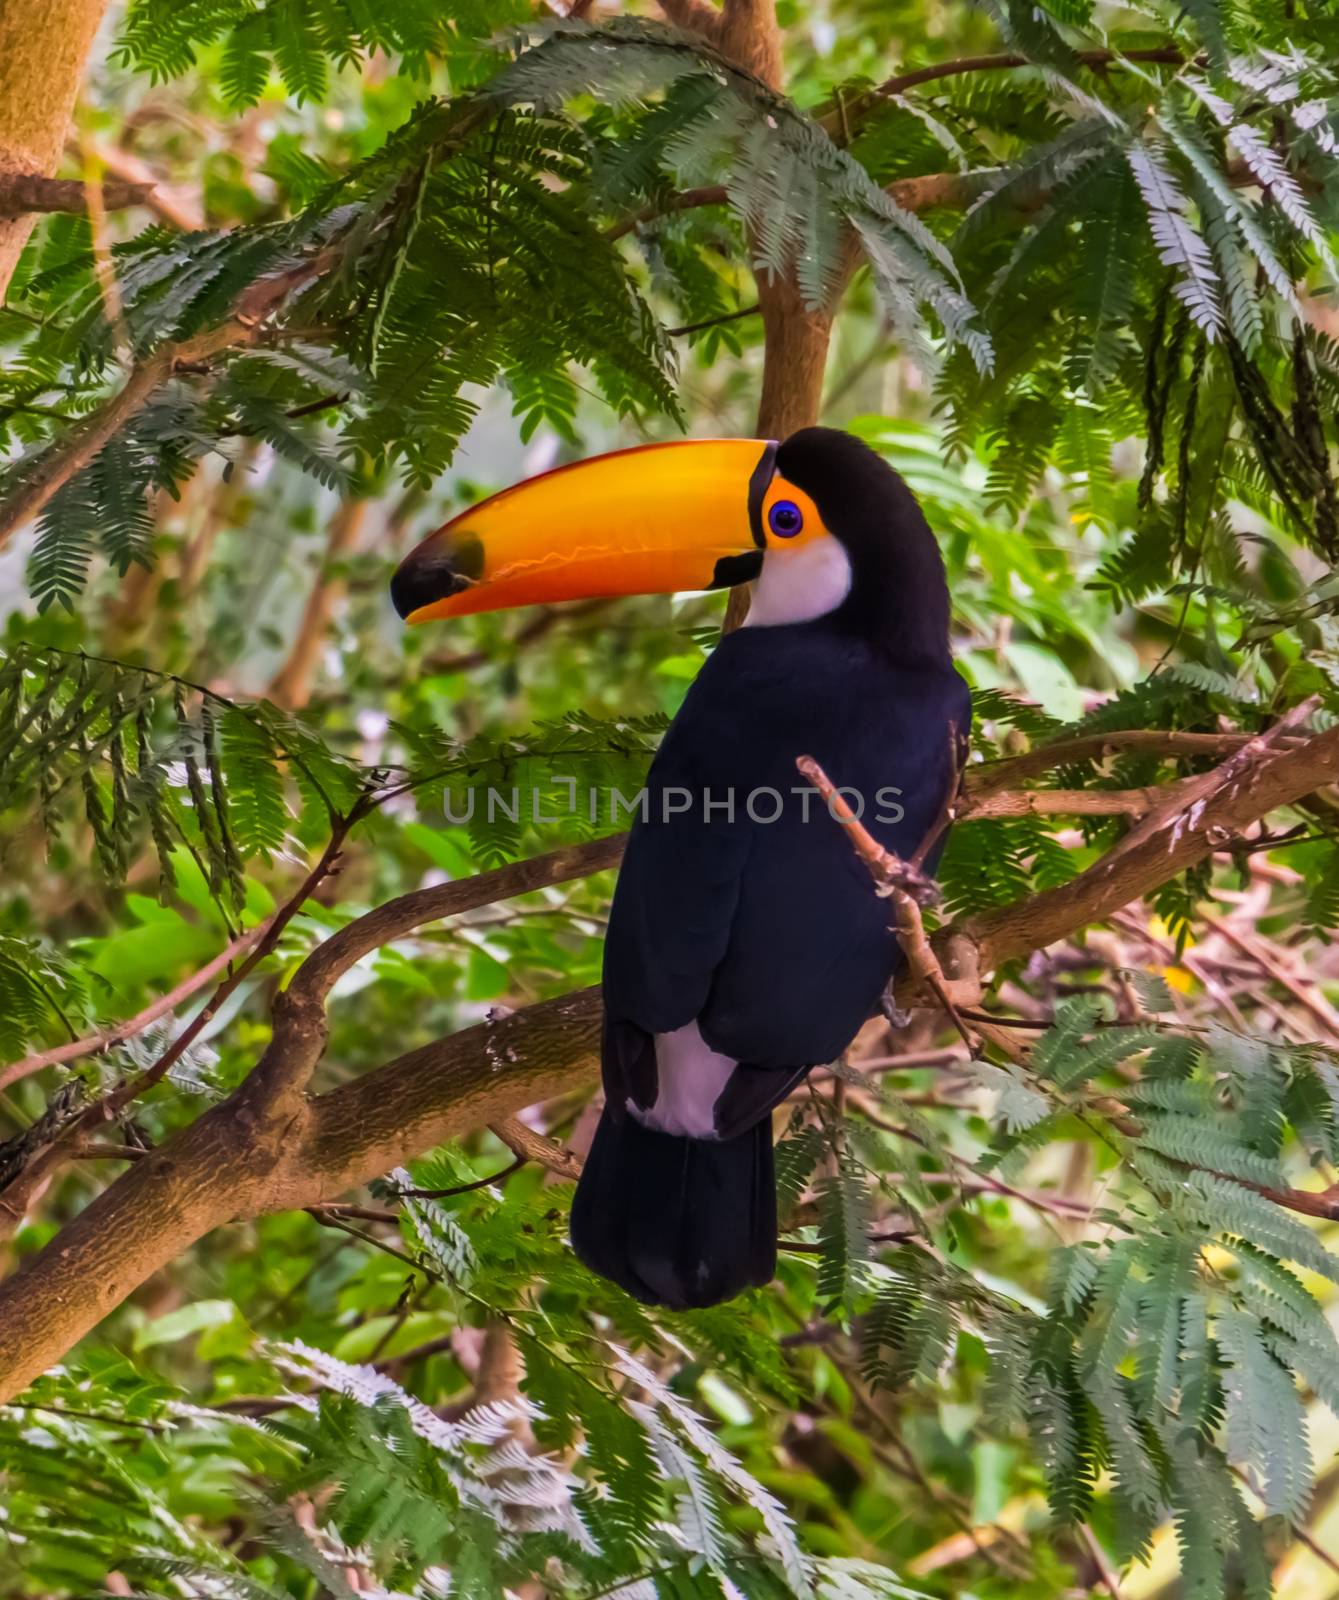 closeup and rear view of a toco toucan sitting in a tree, tropical bird specie from America